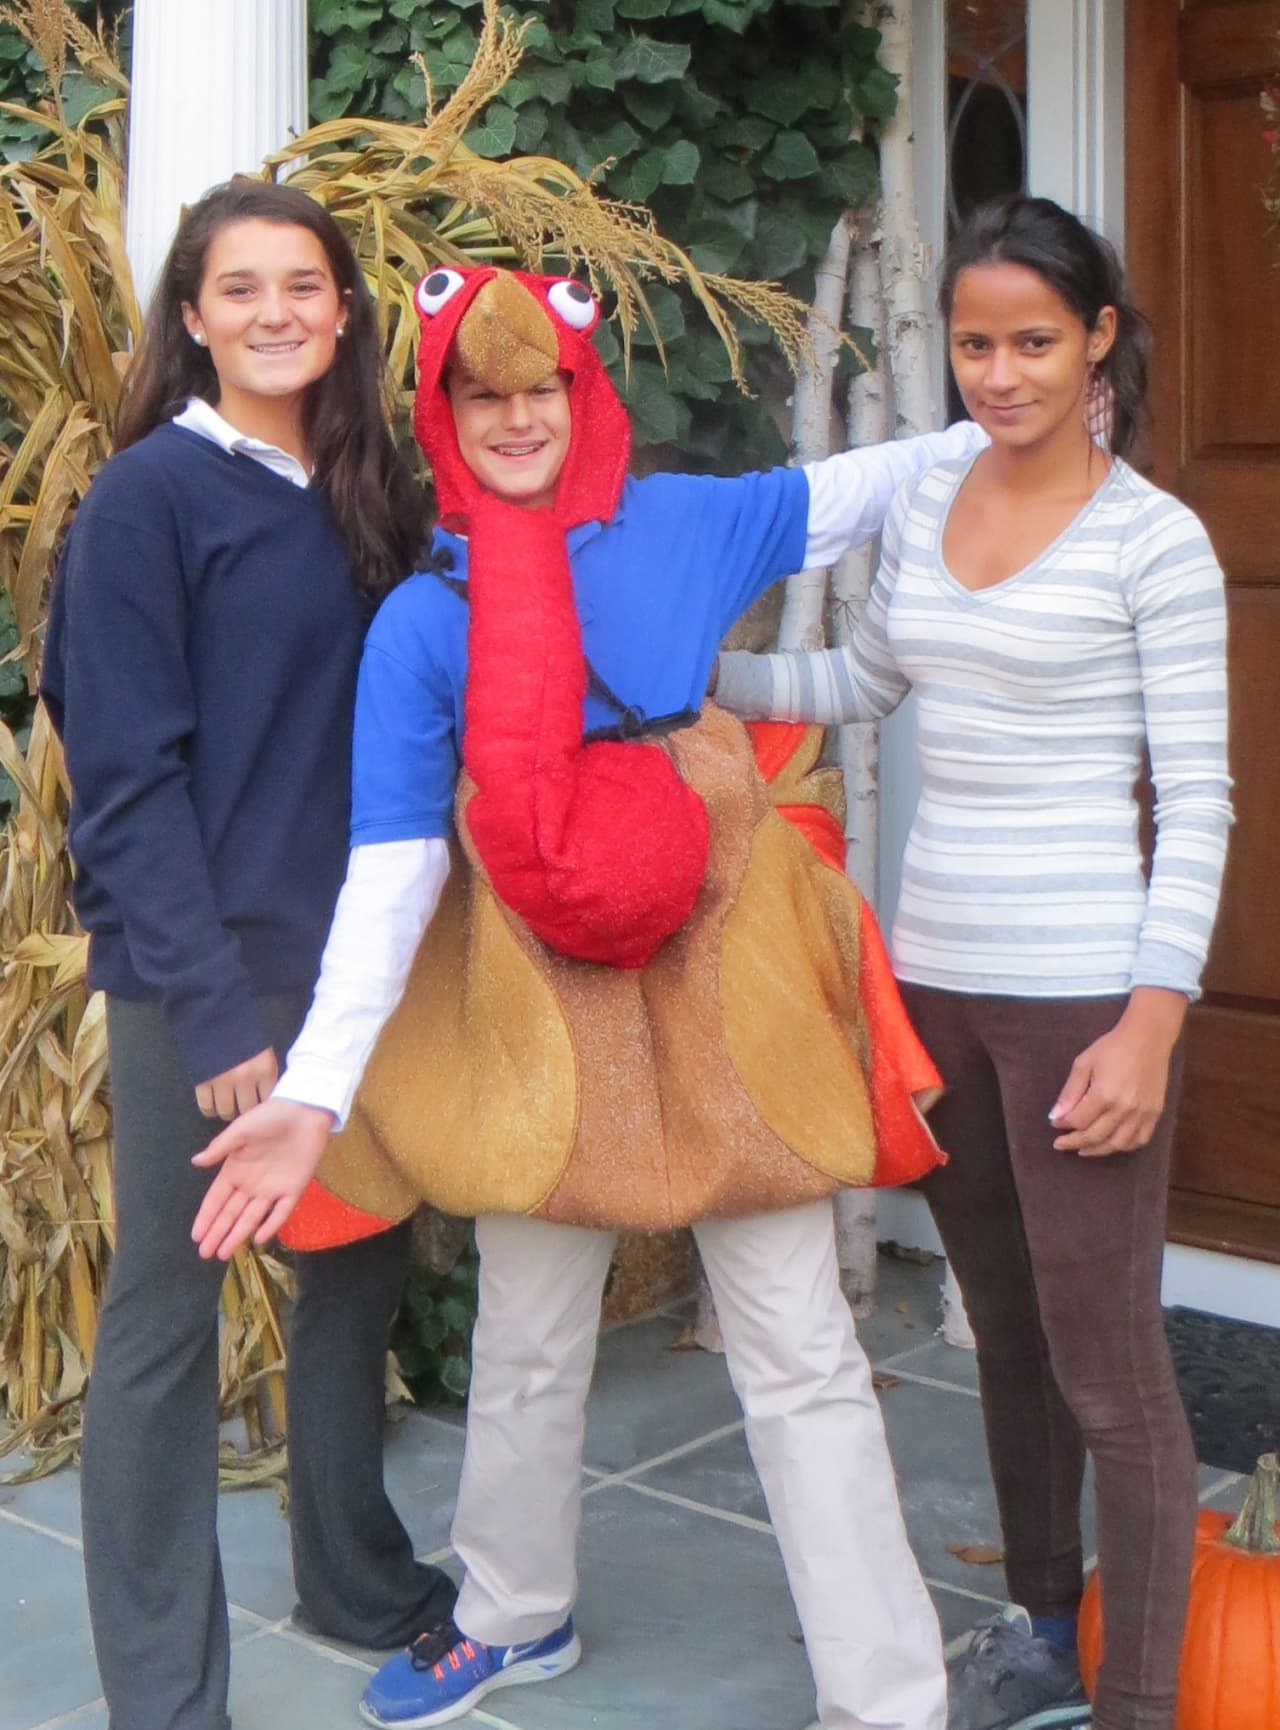 The 10th Annual Turkey Trot is Nov. 24 in New Canaan. From left are Kelly Clark, Teddy Schoenholtz and Ereide Silva